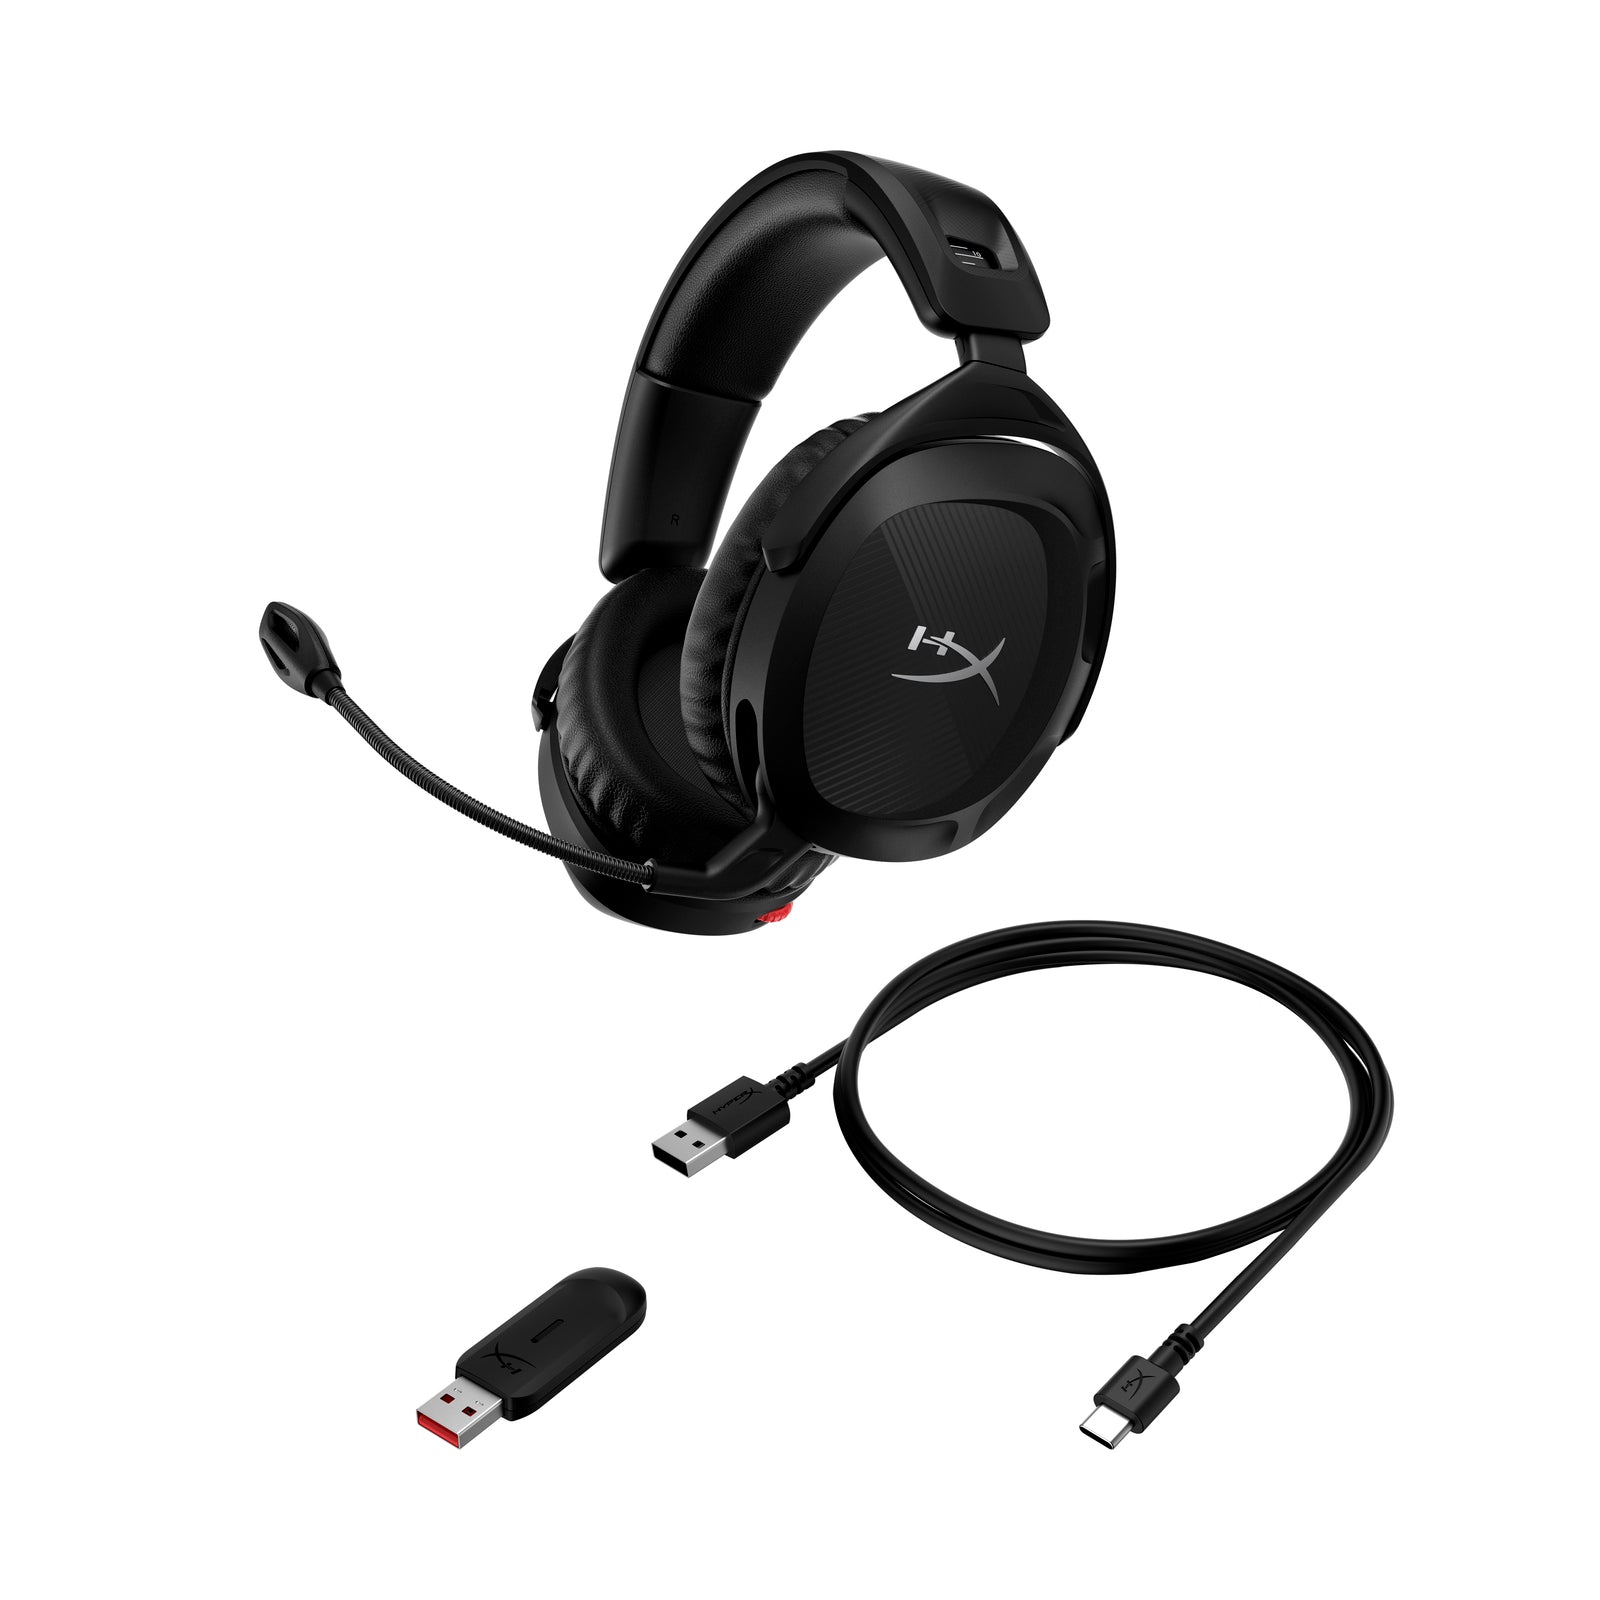 Cloud Stinger 2 – USB Wireless Gaming Headset for PC | HyperX